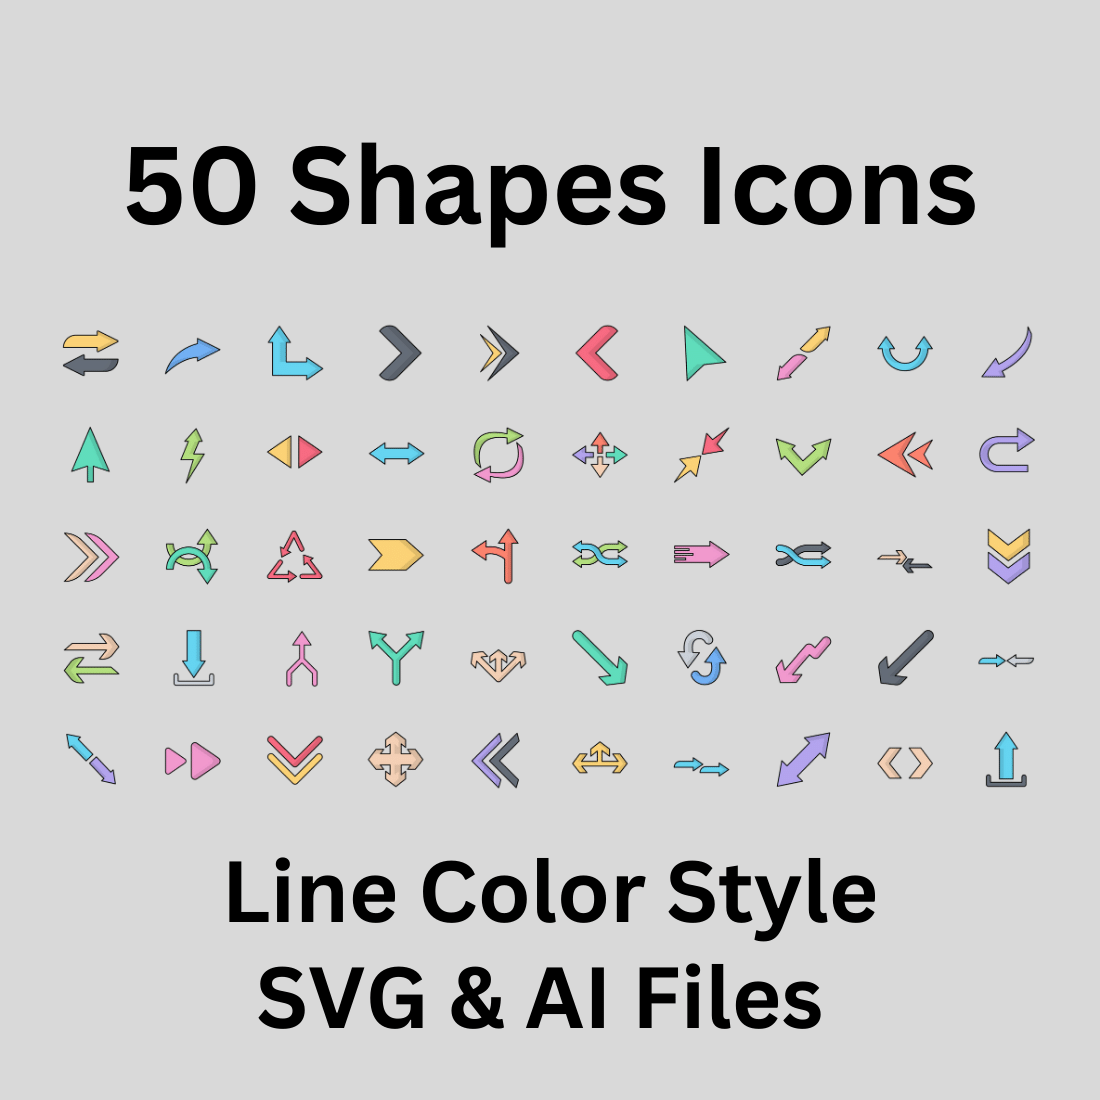 Shapes Icon Set 50 Line Color Icons - SVG And AI Files preview image.